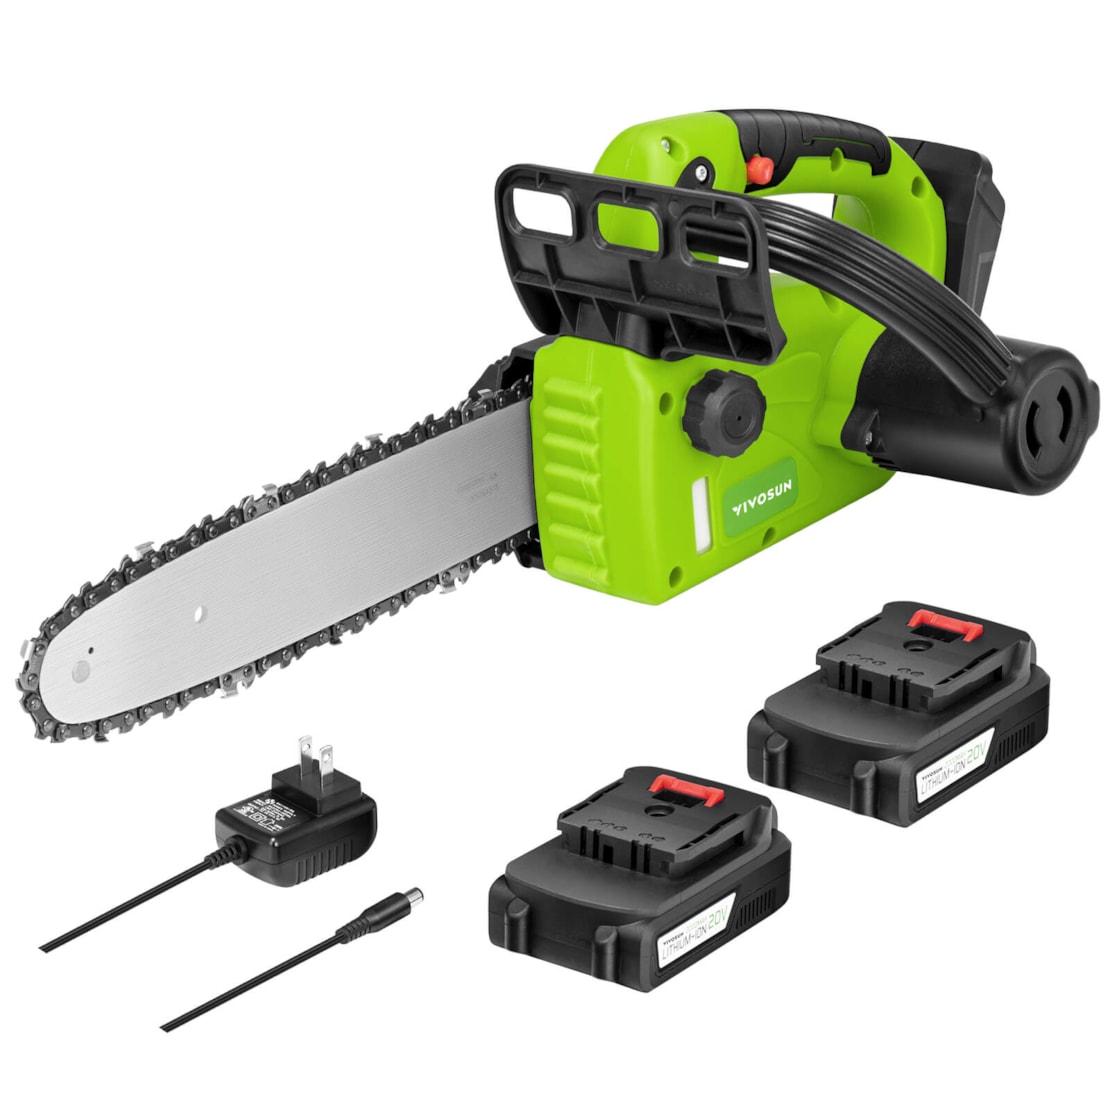 VIVOSUN 10" Cordless Chainsaw with 2Pcs 20V Rechargeable 2000mAh Batteries and Fast Charger